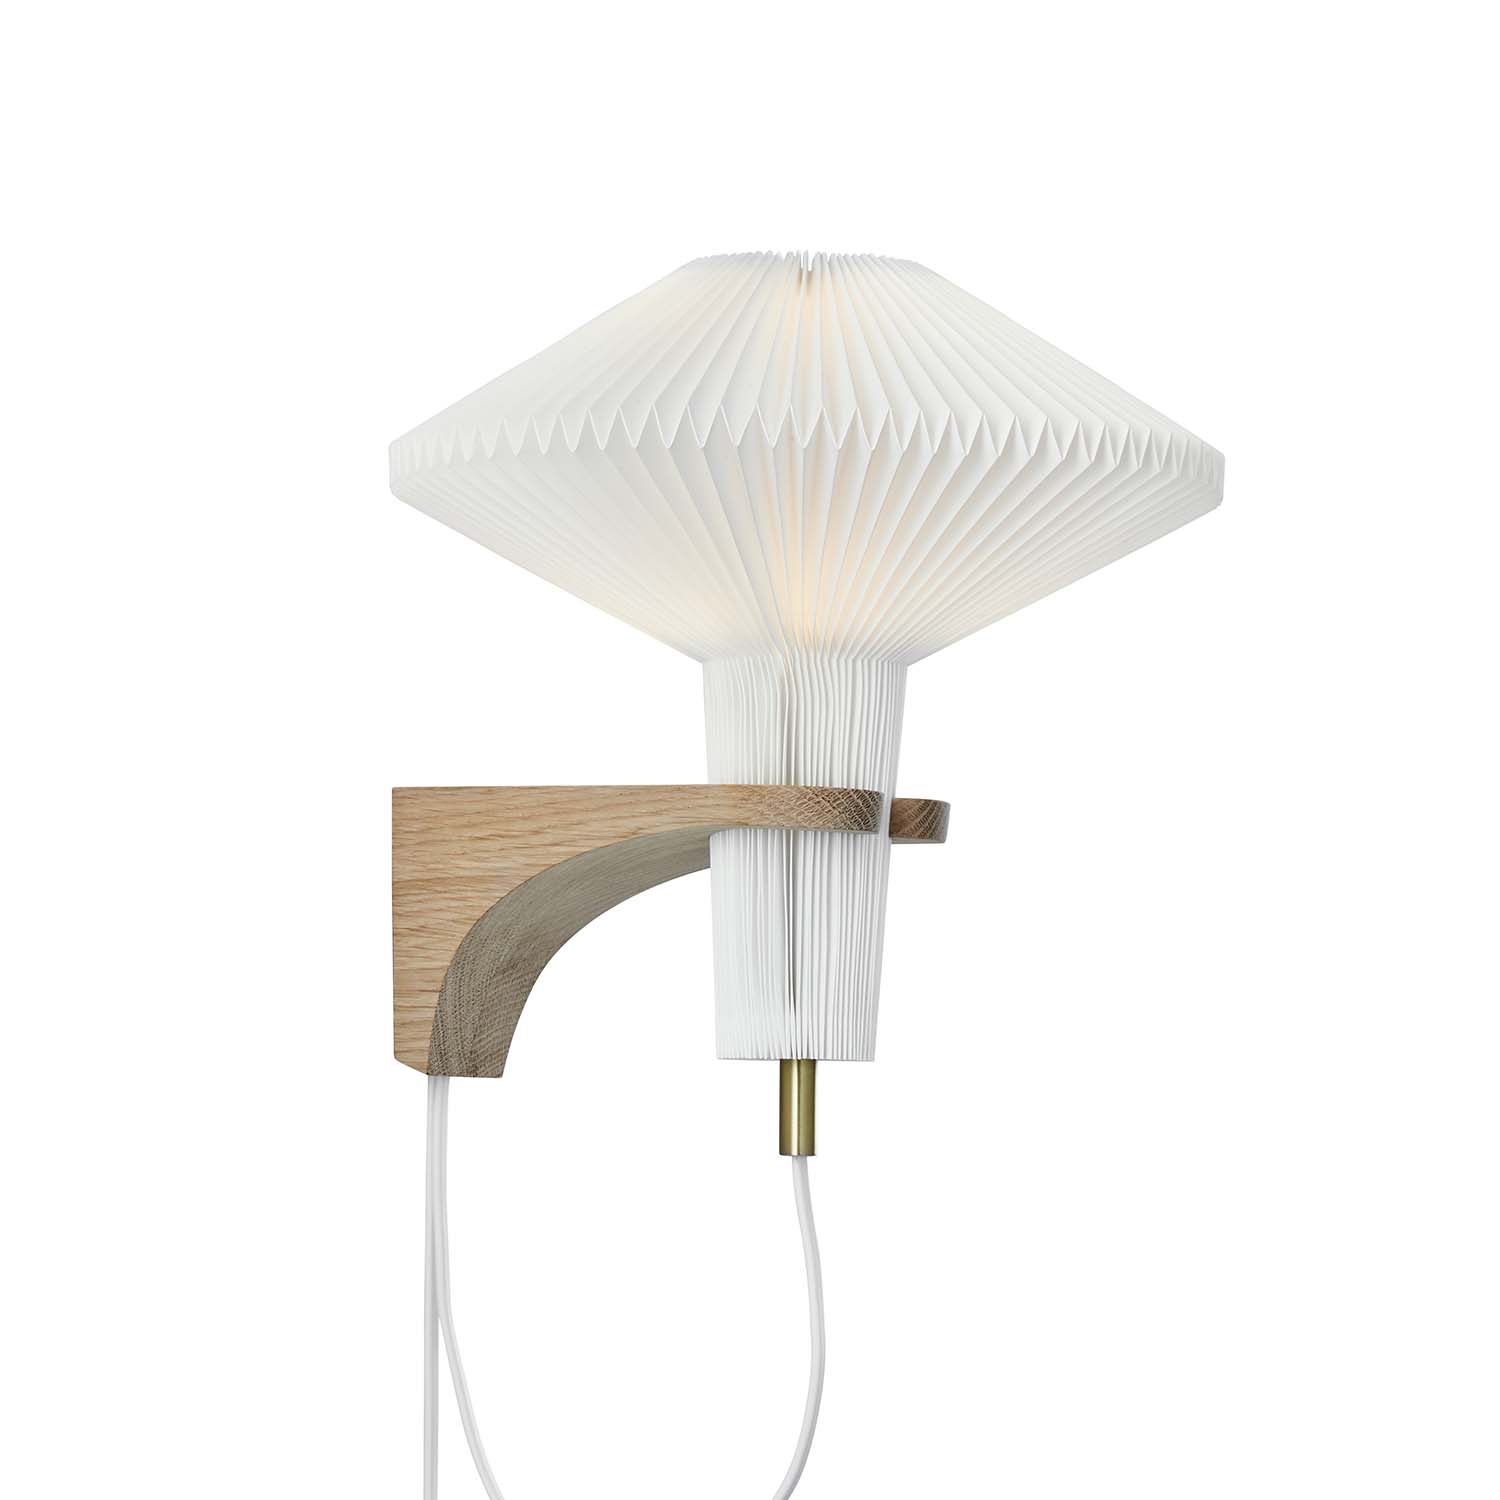 CLASSIC 204 - Wall light in wood and handmade pleated paper